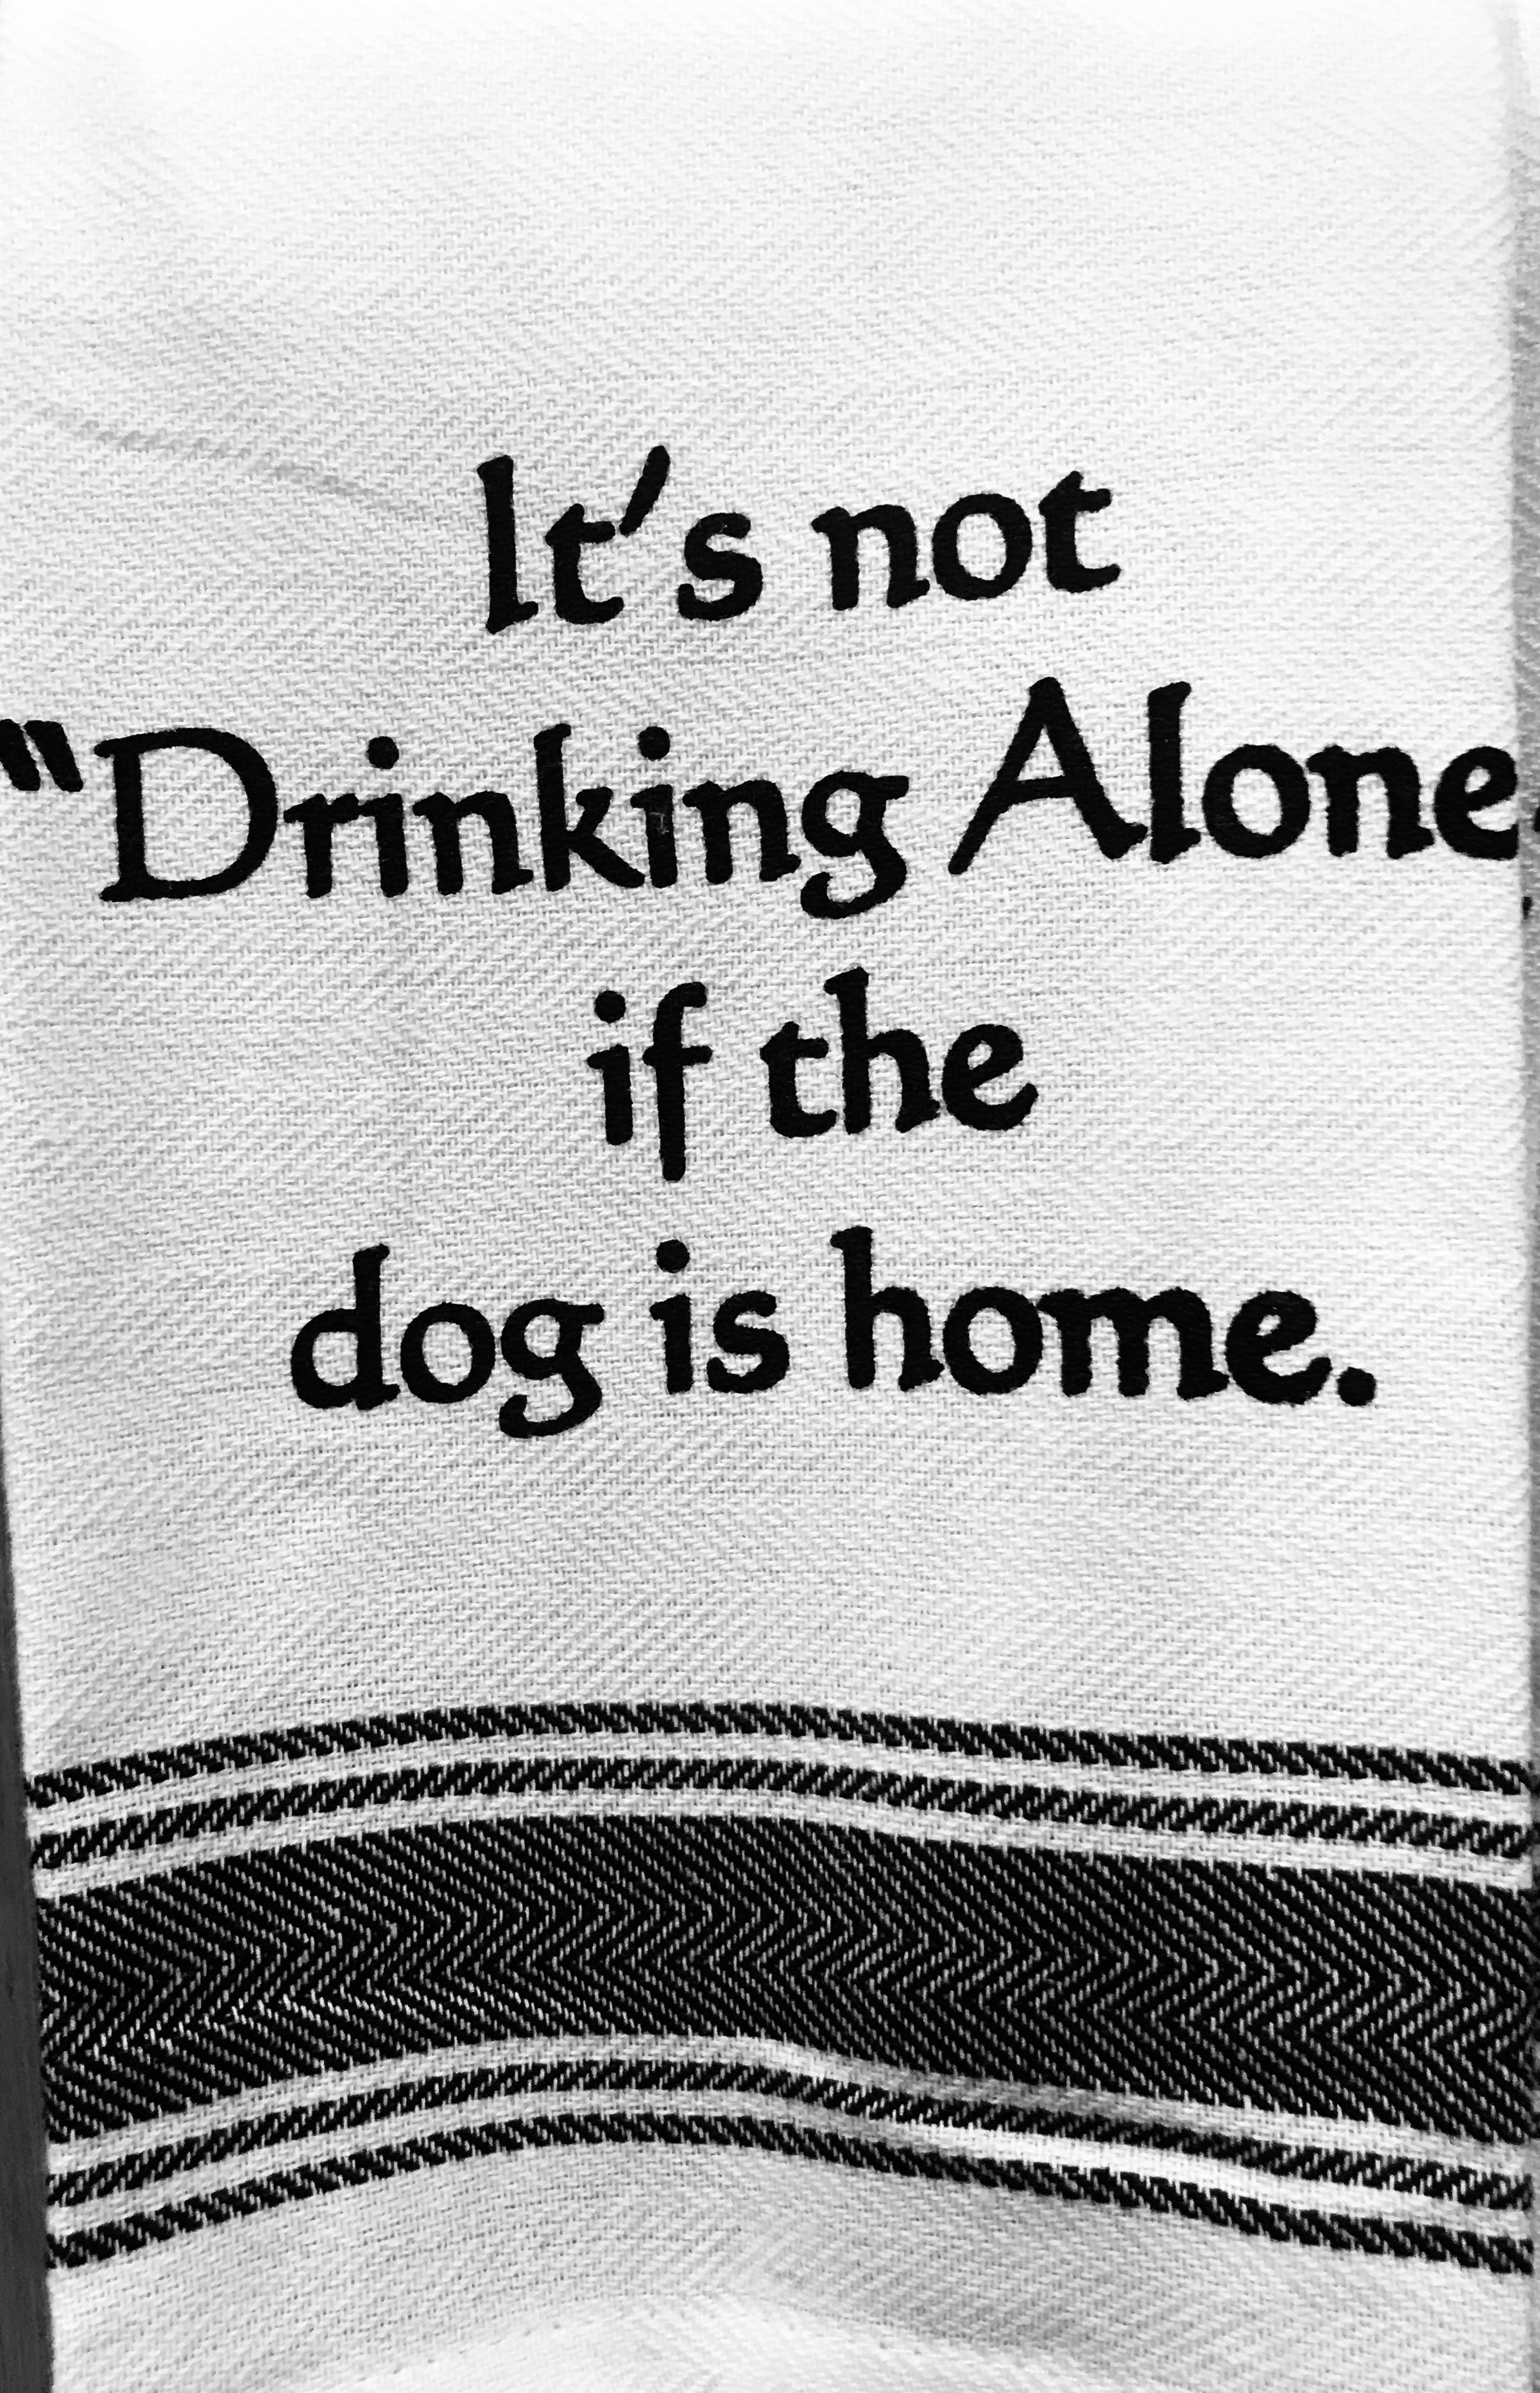 Drinking Alone with the dog - Towel